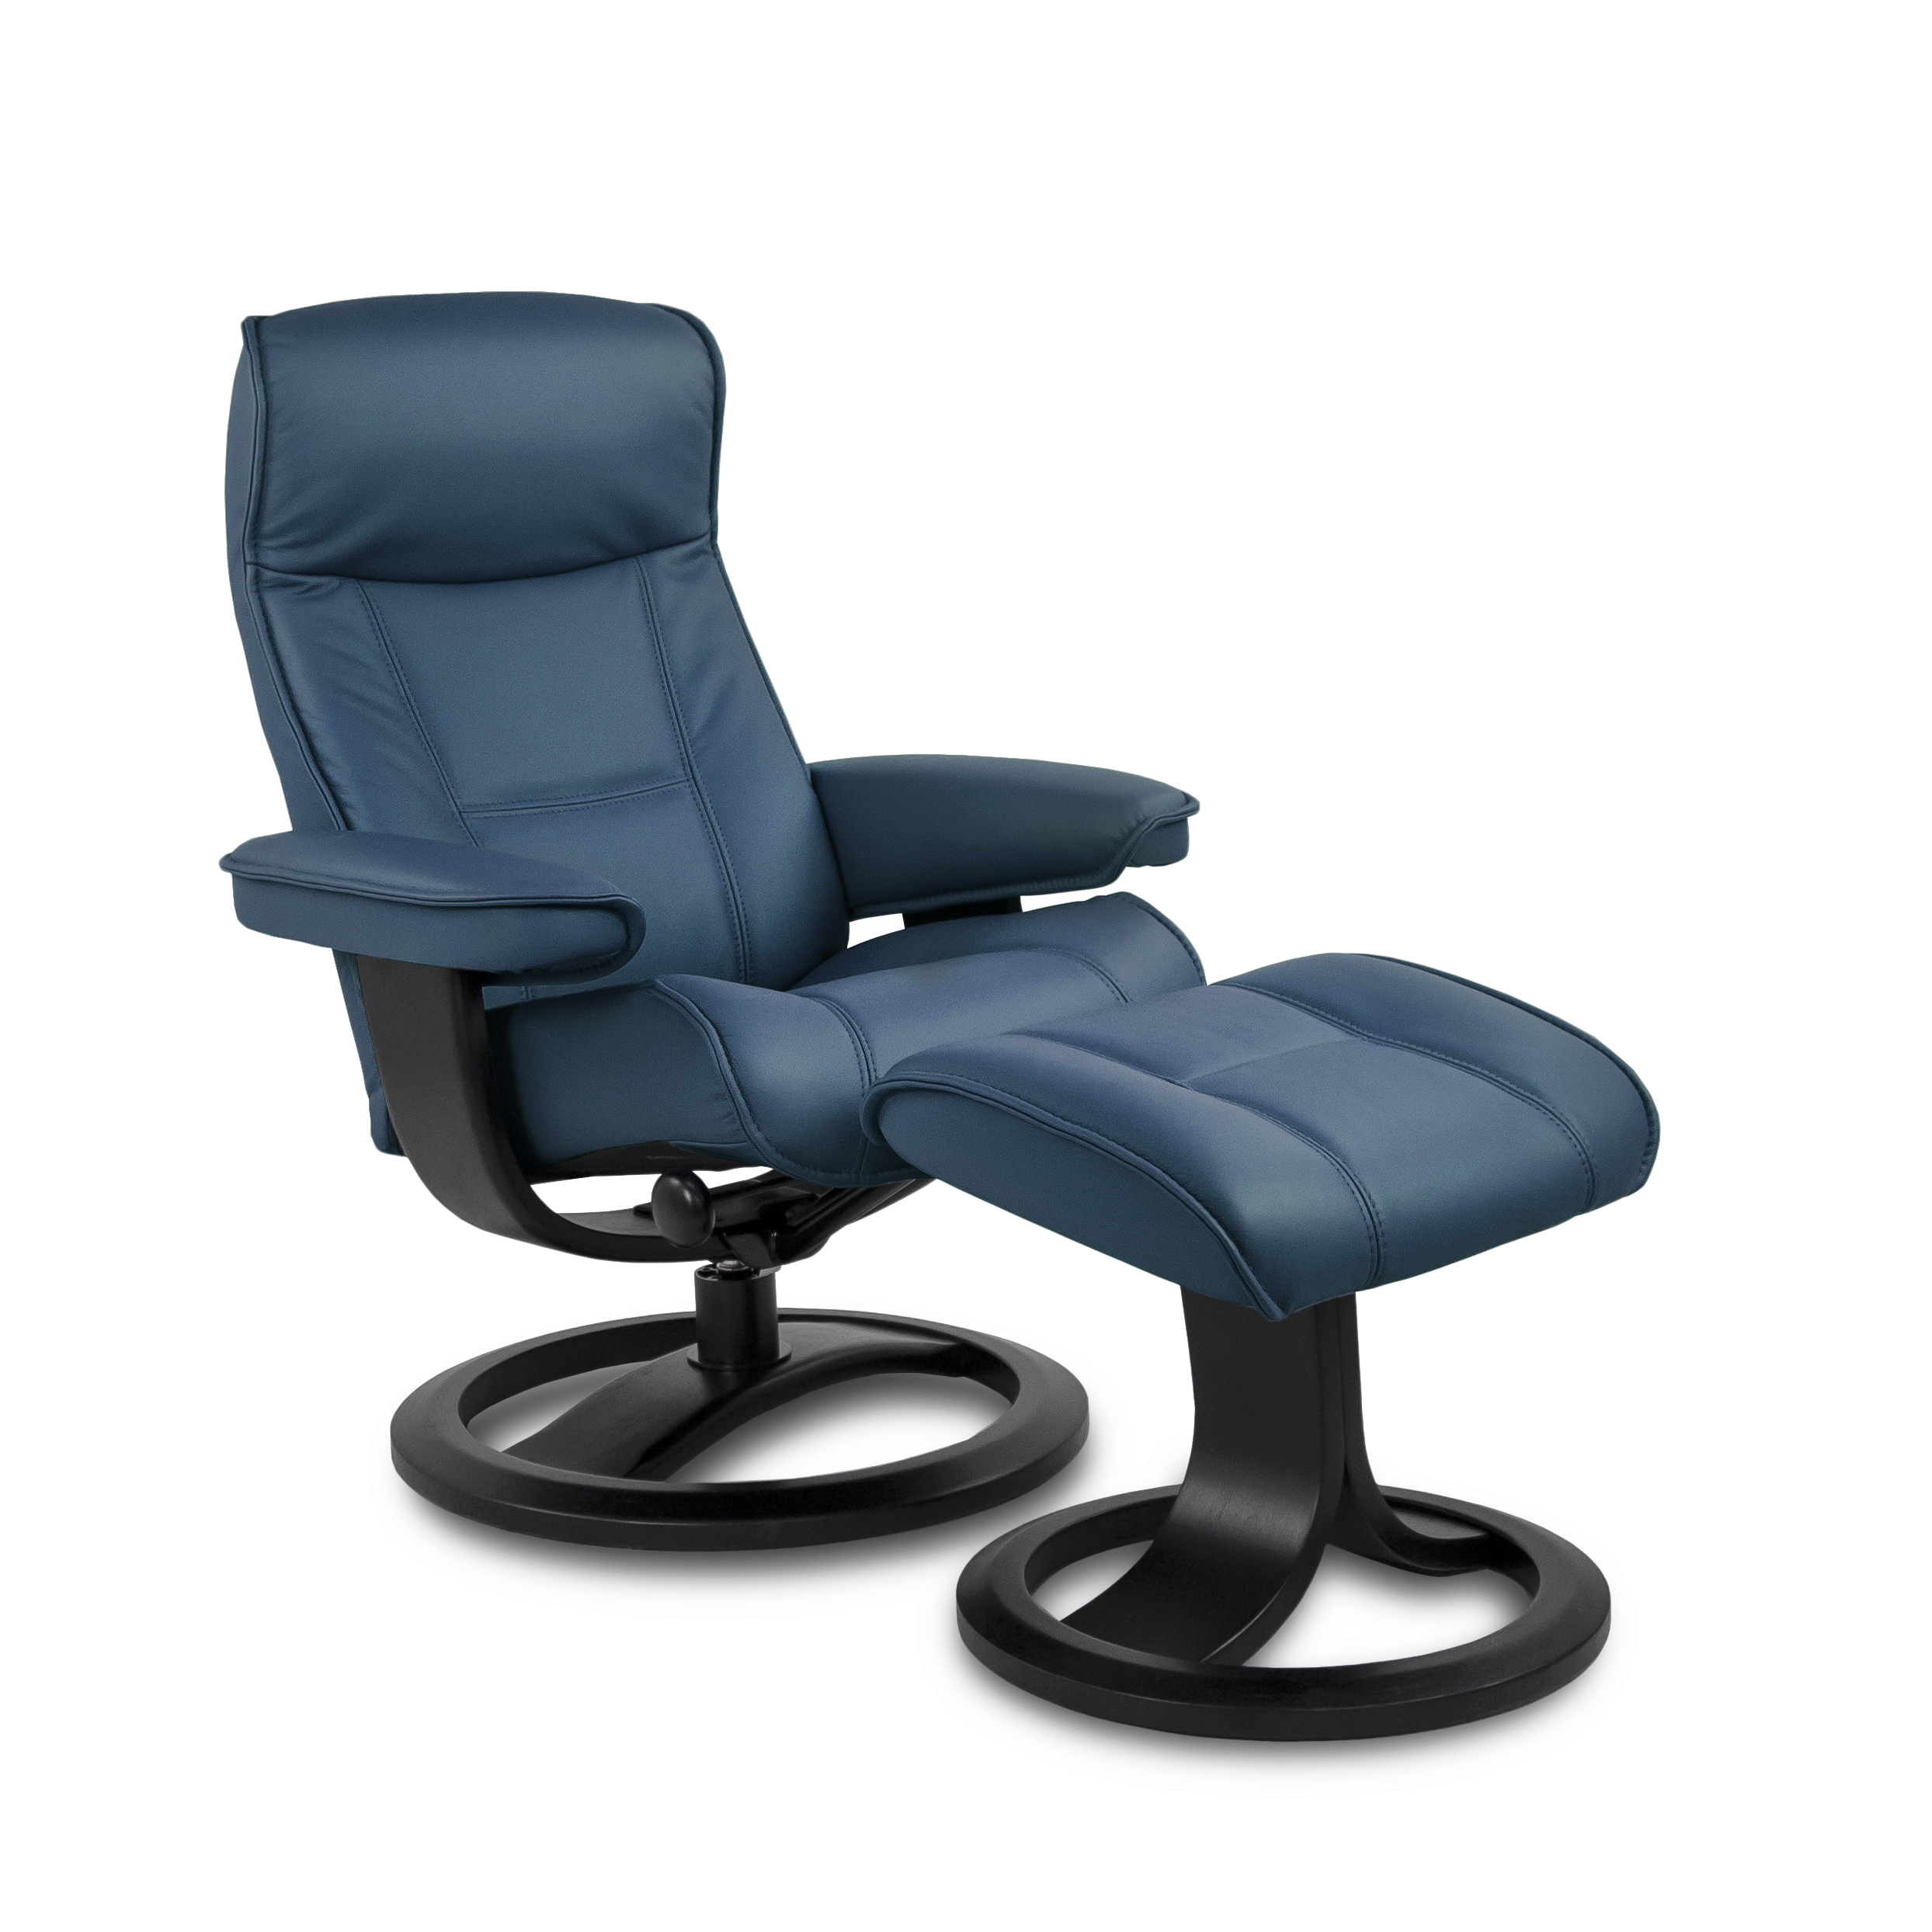 Img Nordic 21 Leather Recliner, Leather Recliner Swivel